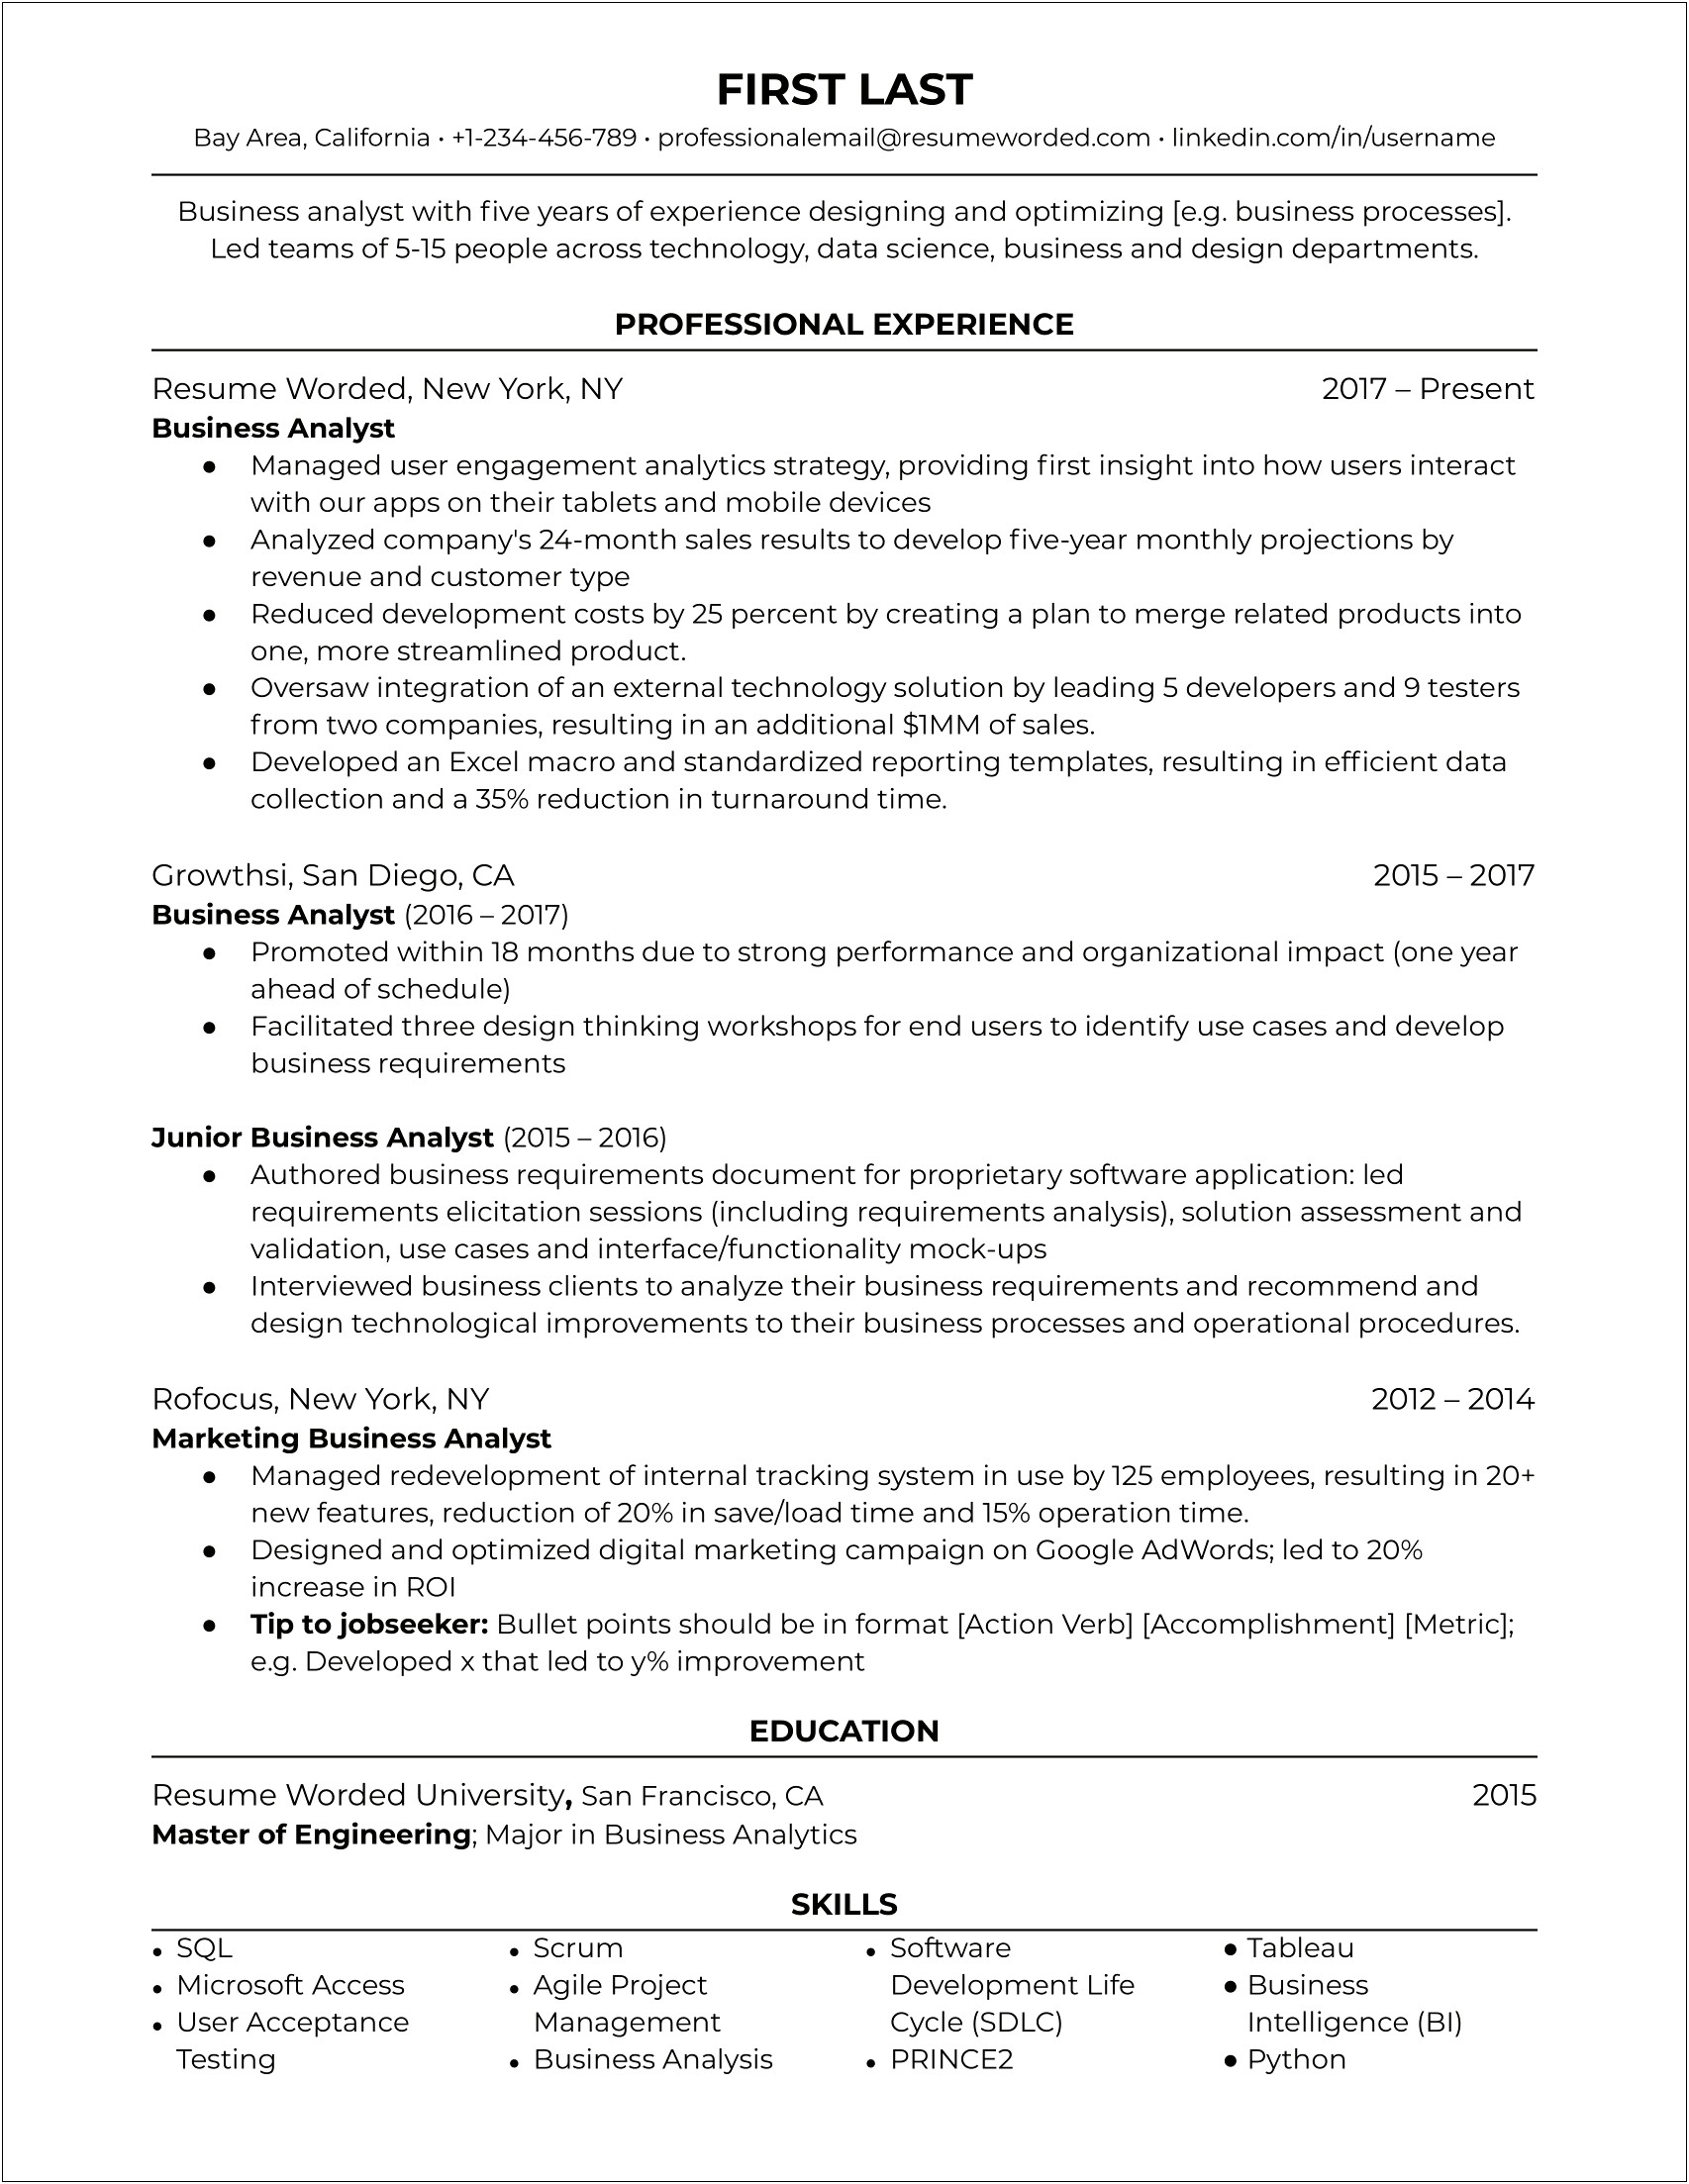 Ba With Web Service Experience Resume